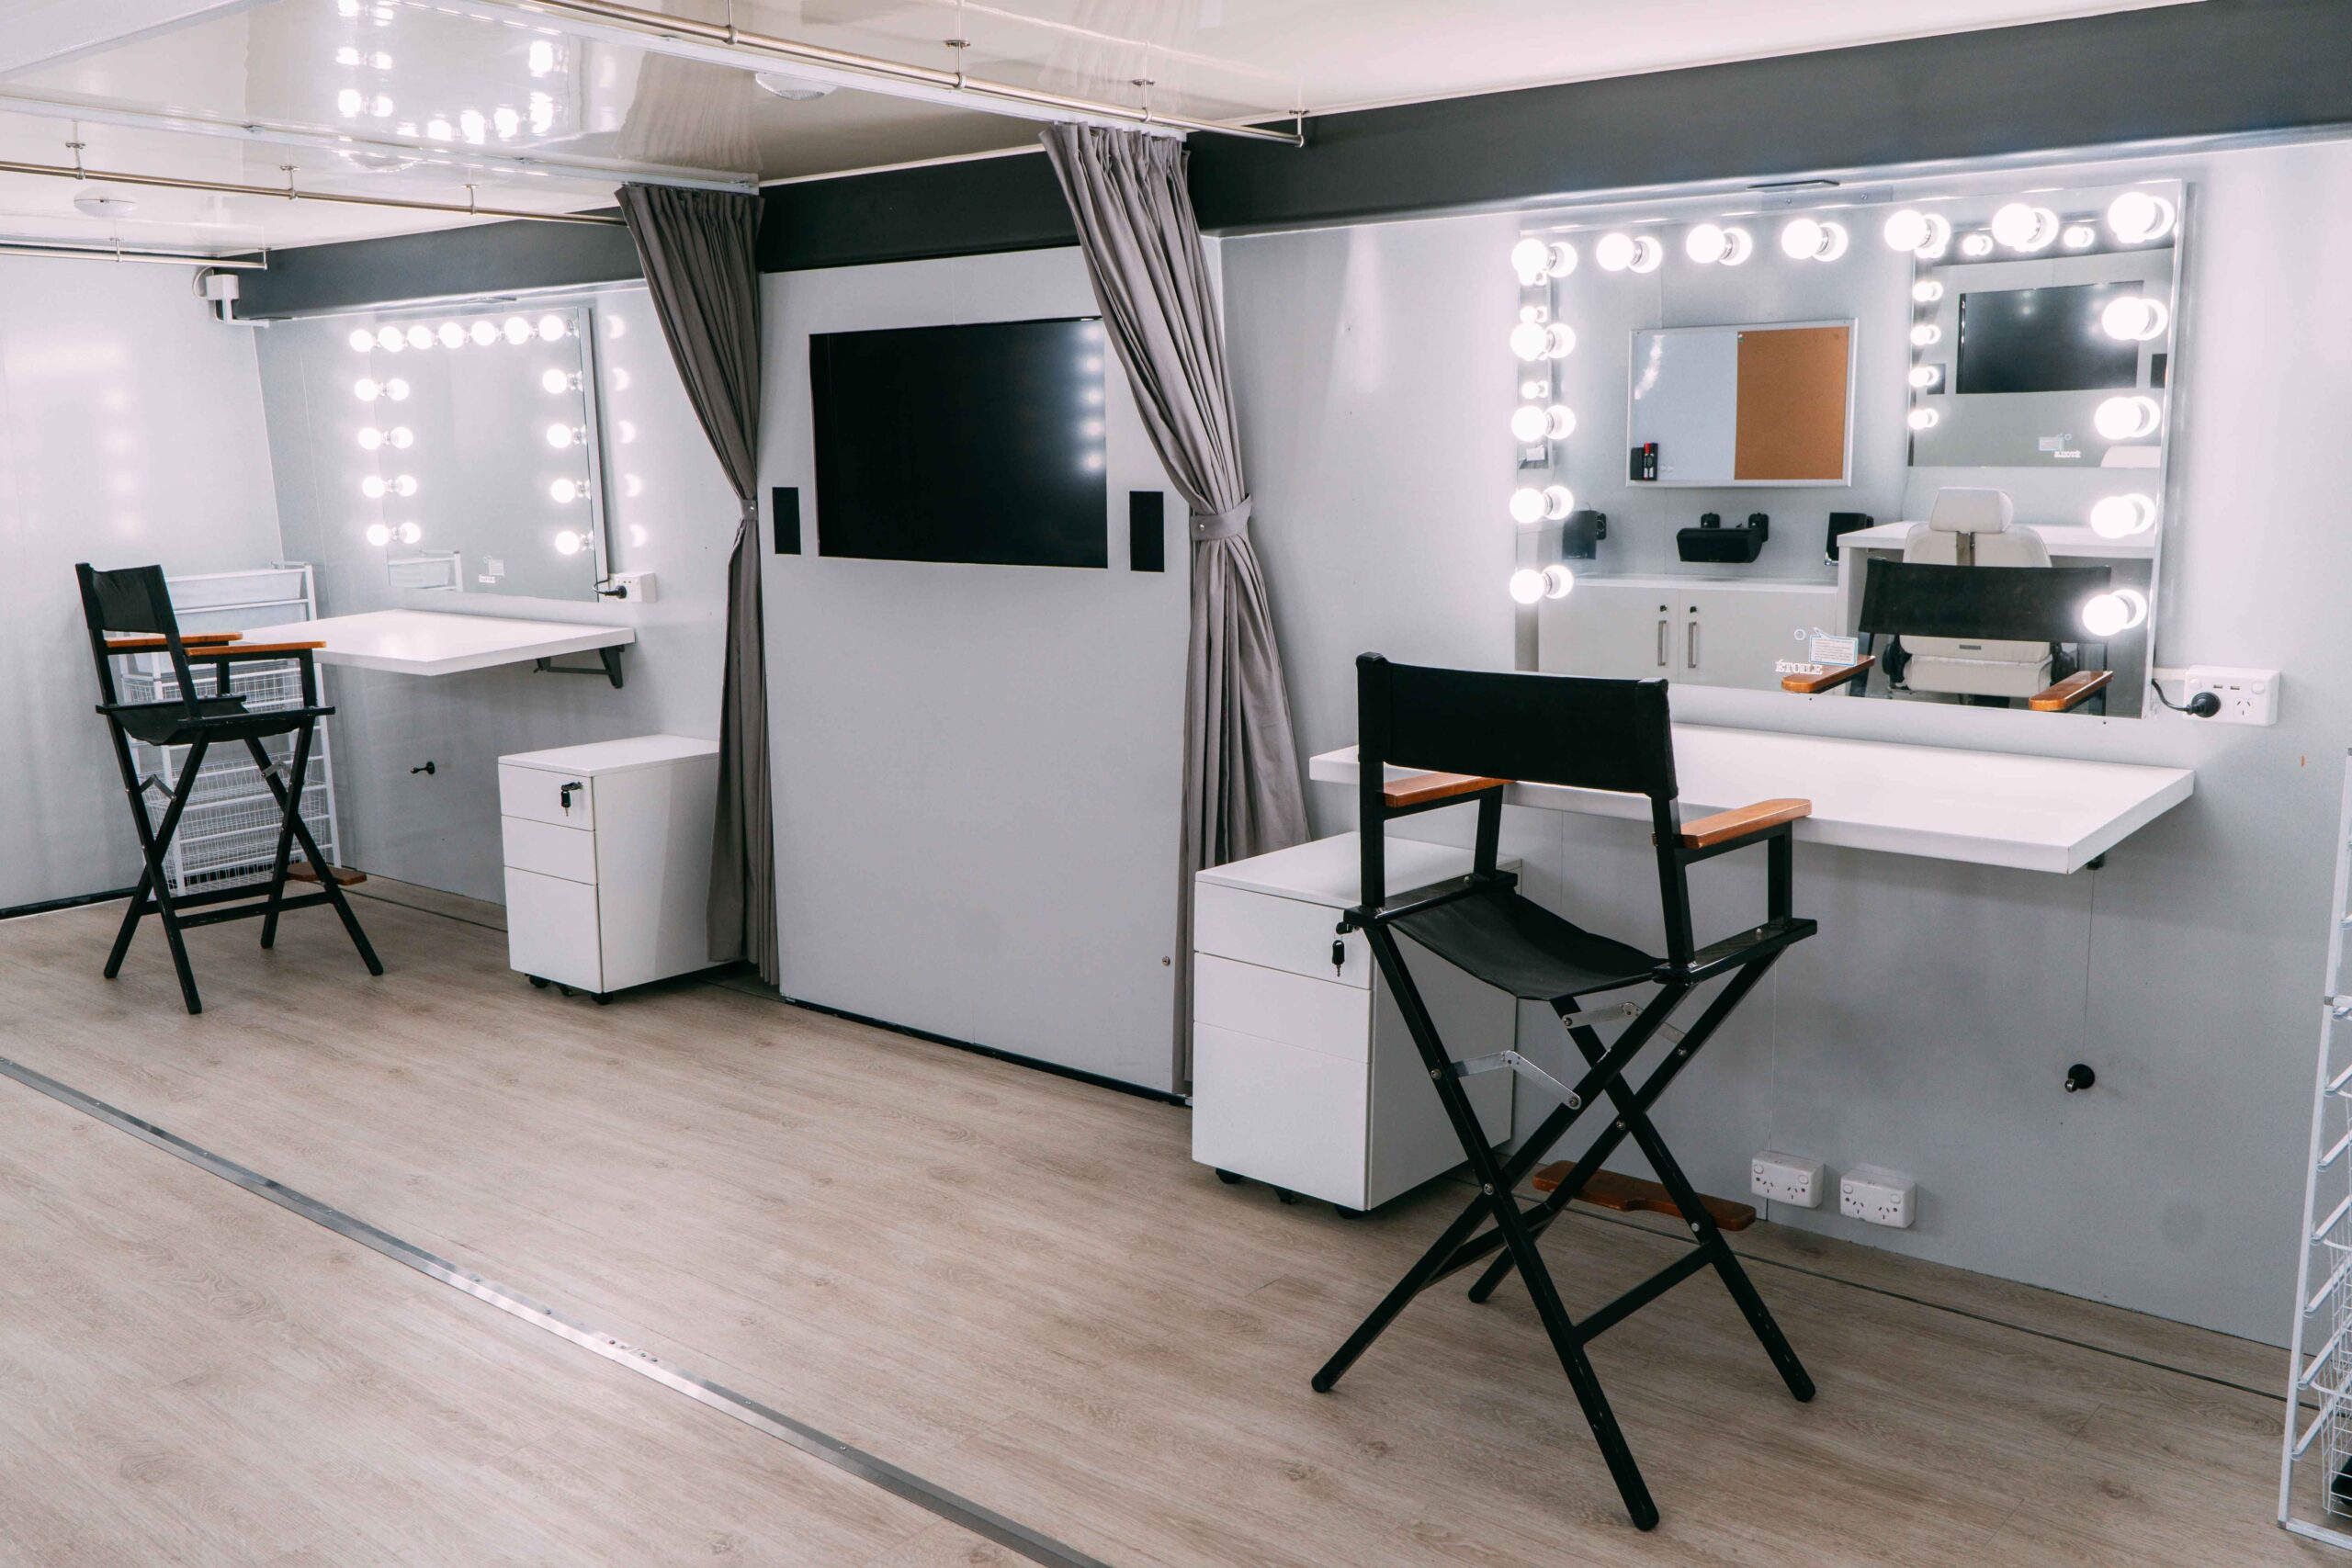 Flexible spaces for hair and makeup or wardrobeThree flexible spaces, which can be used for hair and makeup, or wardrobe.